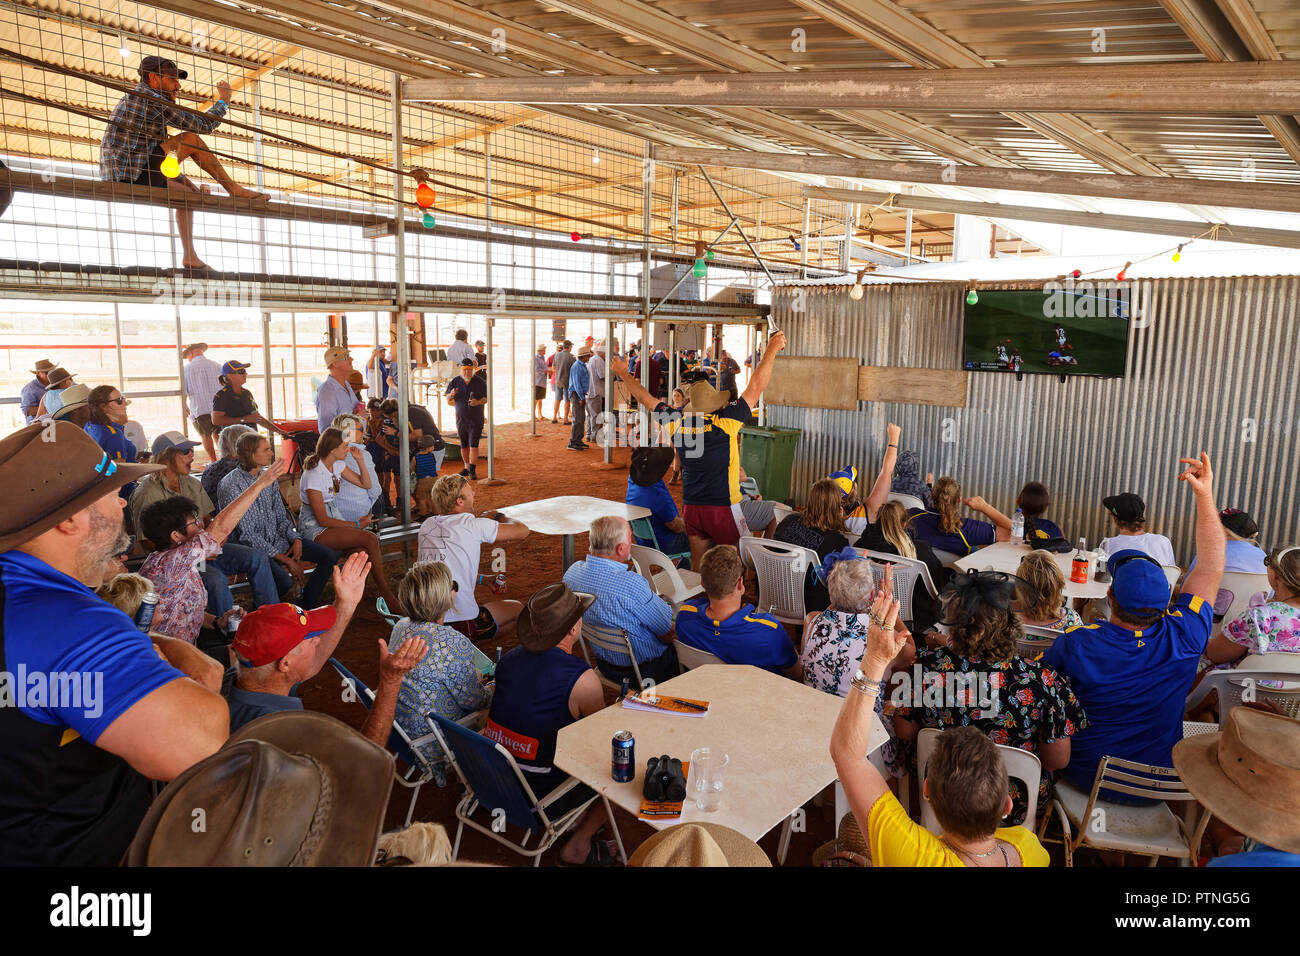 Spectators watch  the AFL grand final before horse races at Landor, 1000km north of Perth, Western Australia. Stock Photo